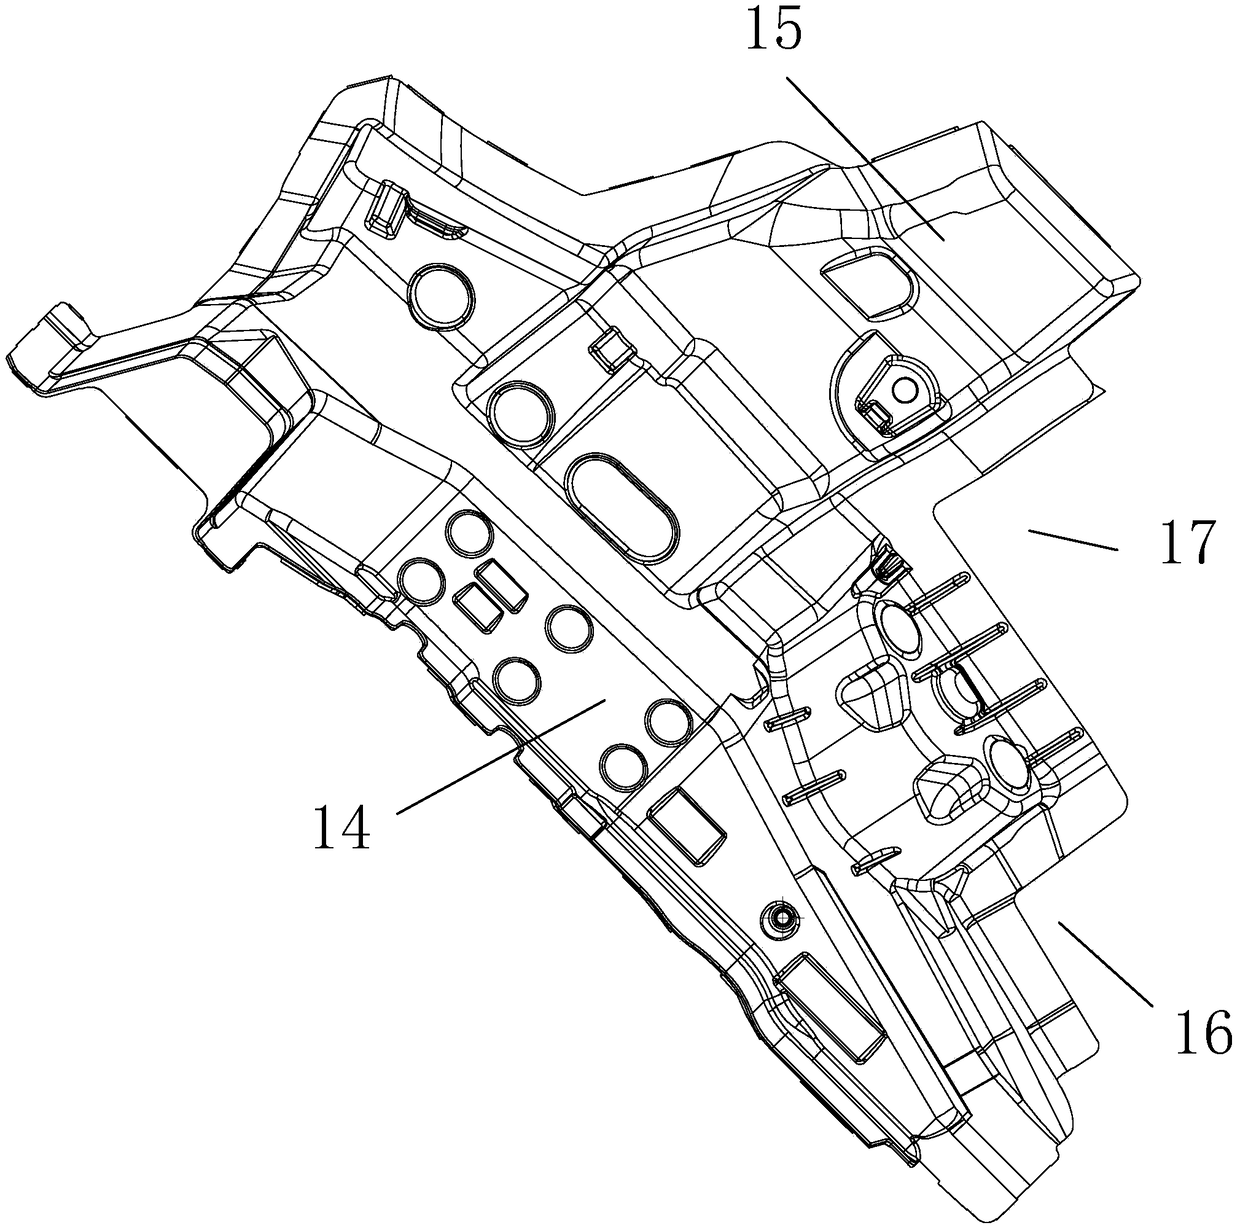 Pouring exhaust system of automobile component die-casting die and arrangement method